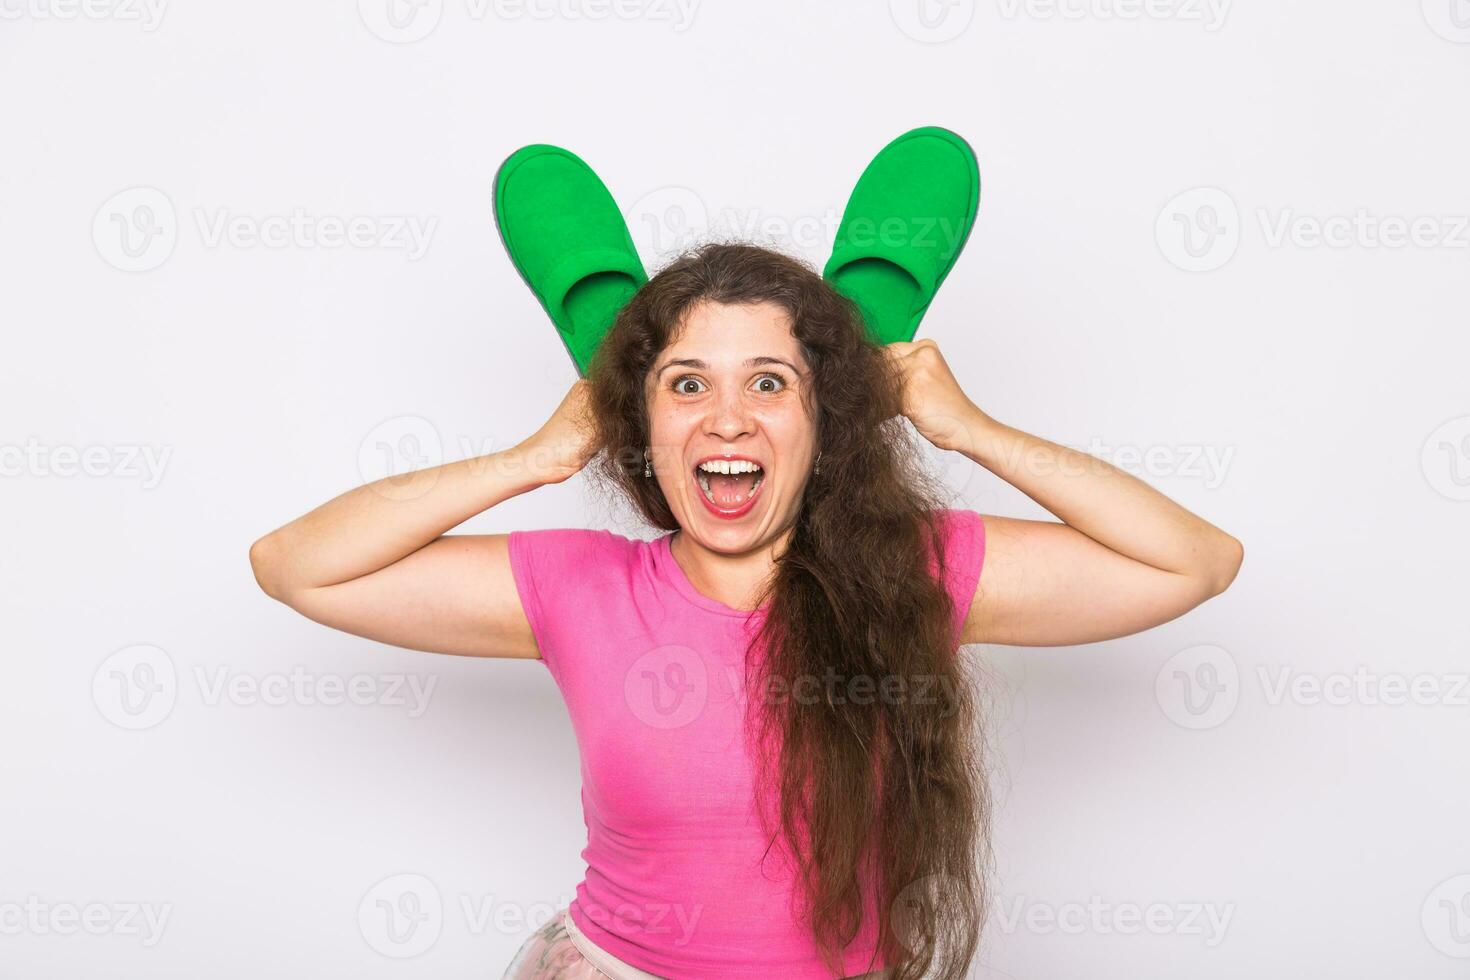 Pretty young woman fooling around with green slippers on white background photo